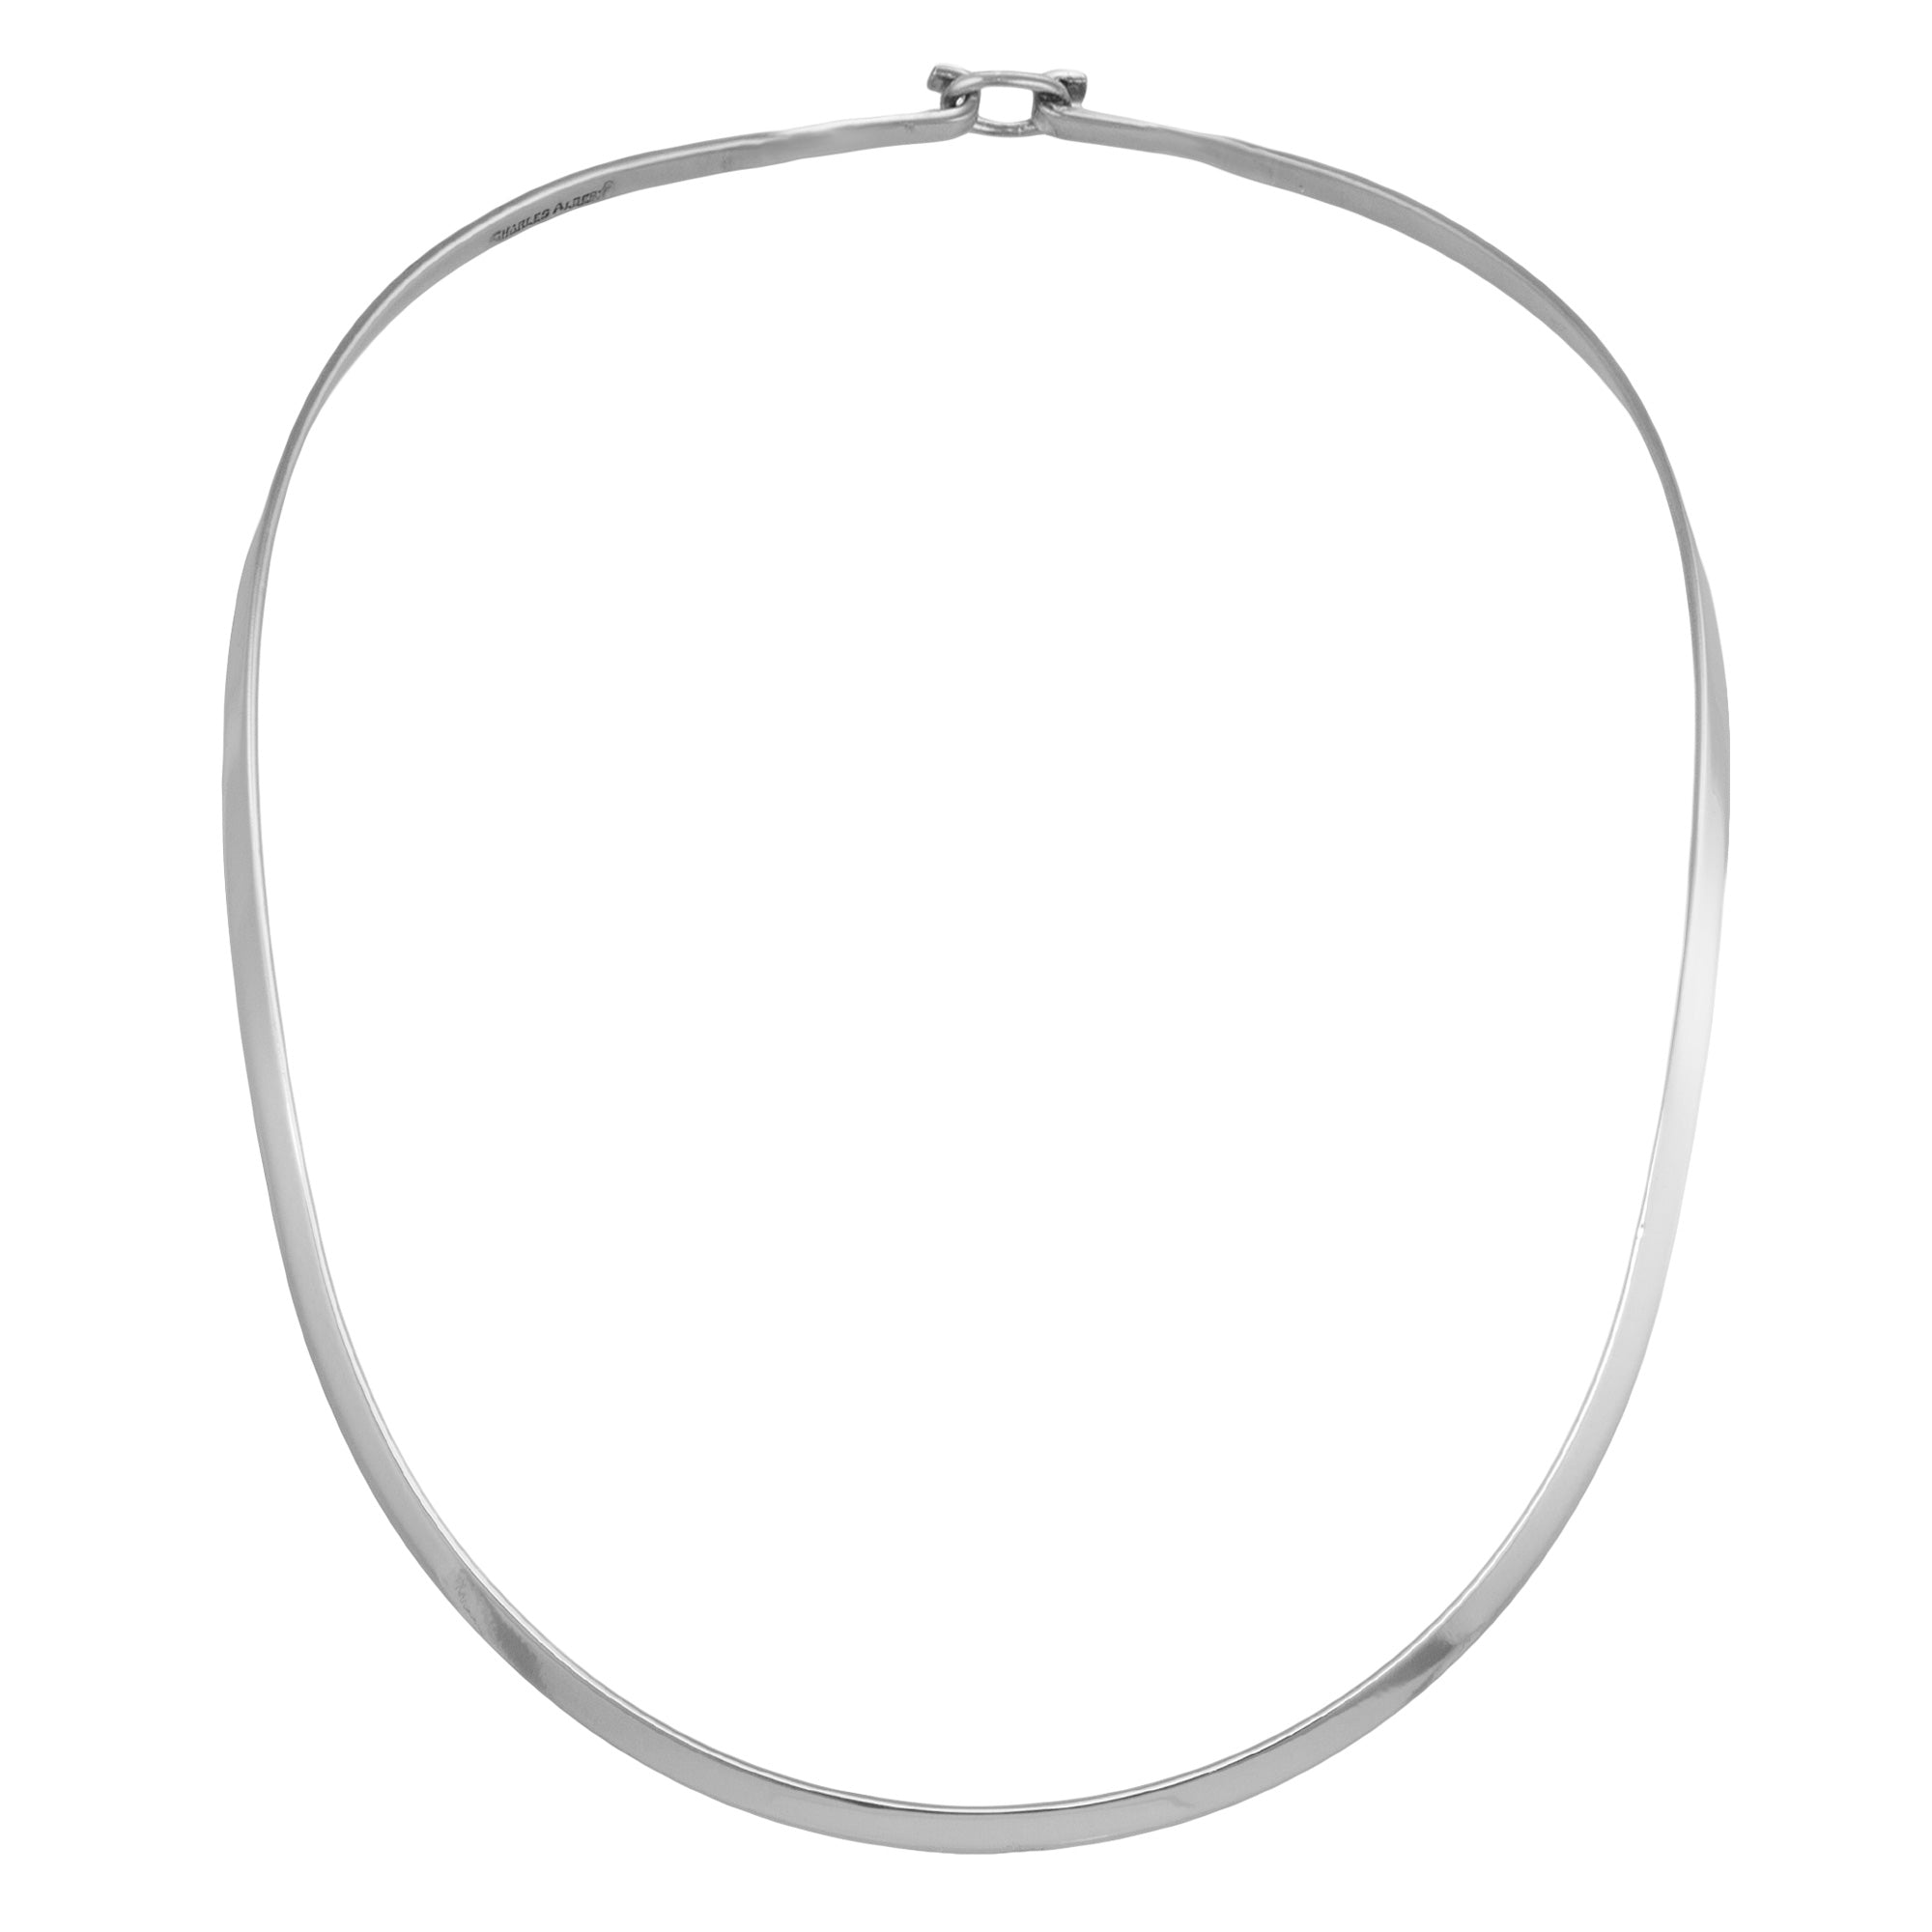 Silver Plated Oval Neckwire with Clasp | Charles Albert Jewelry